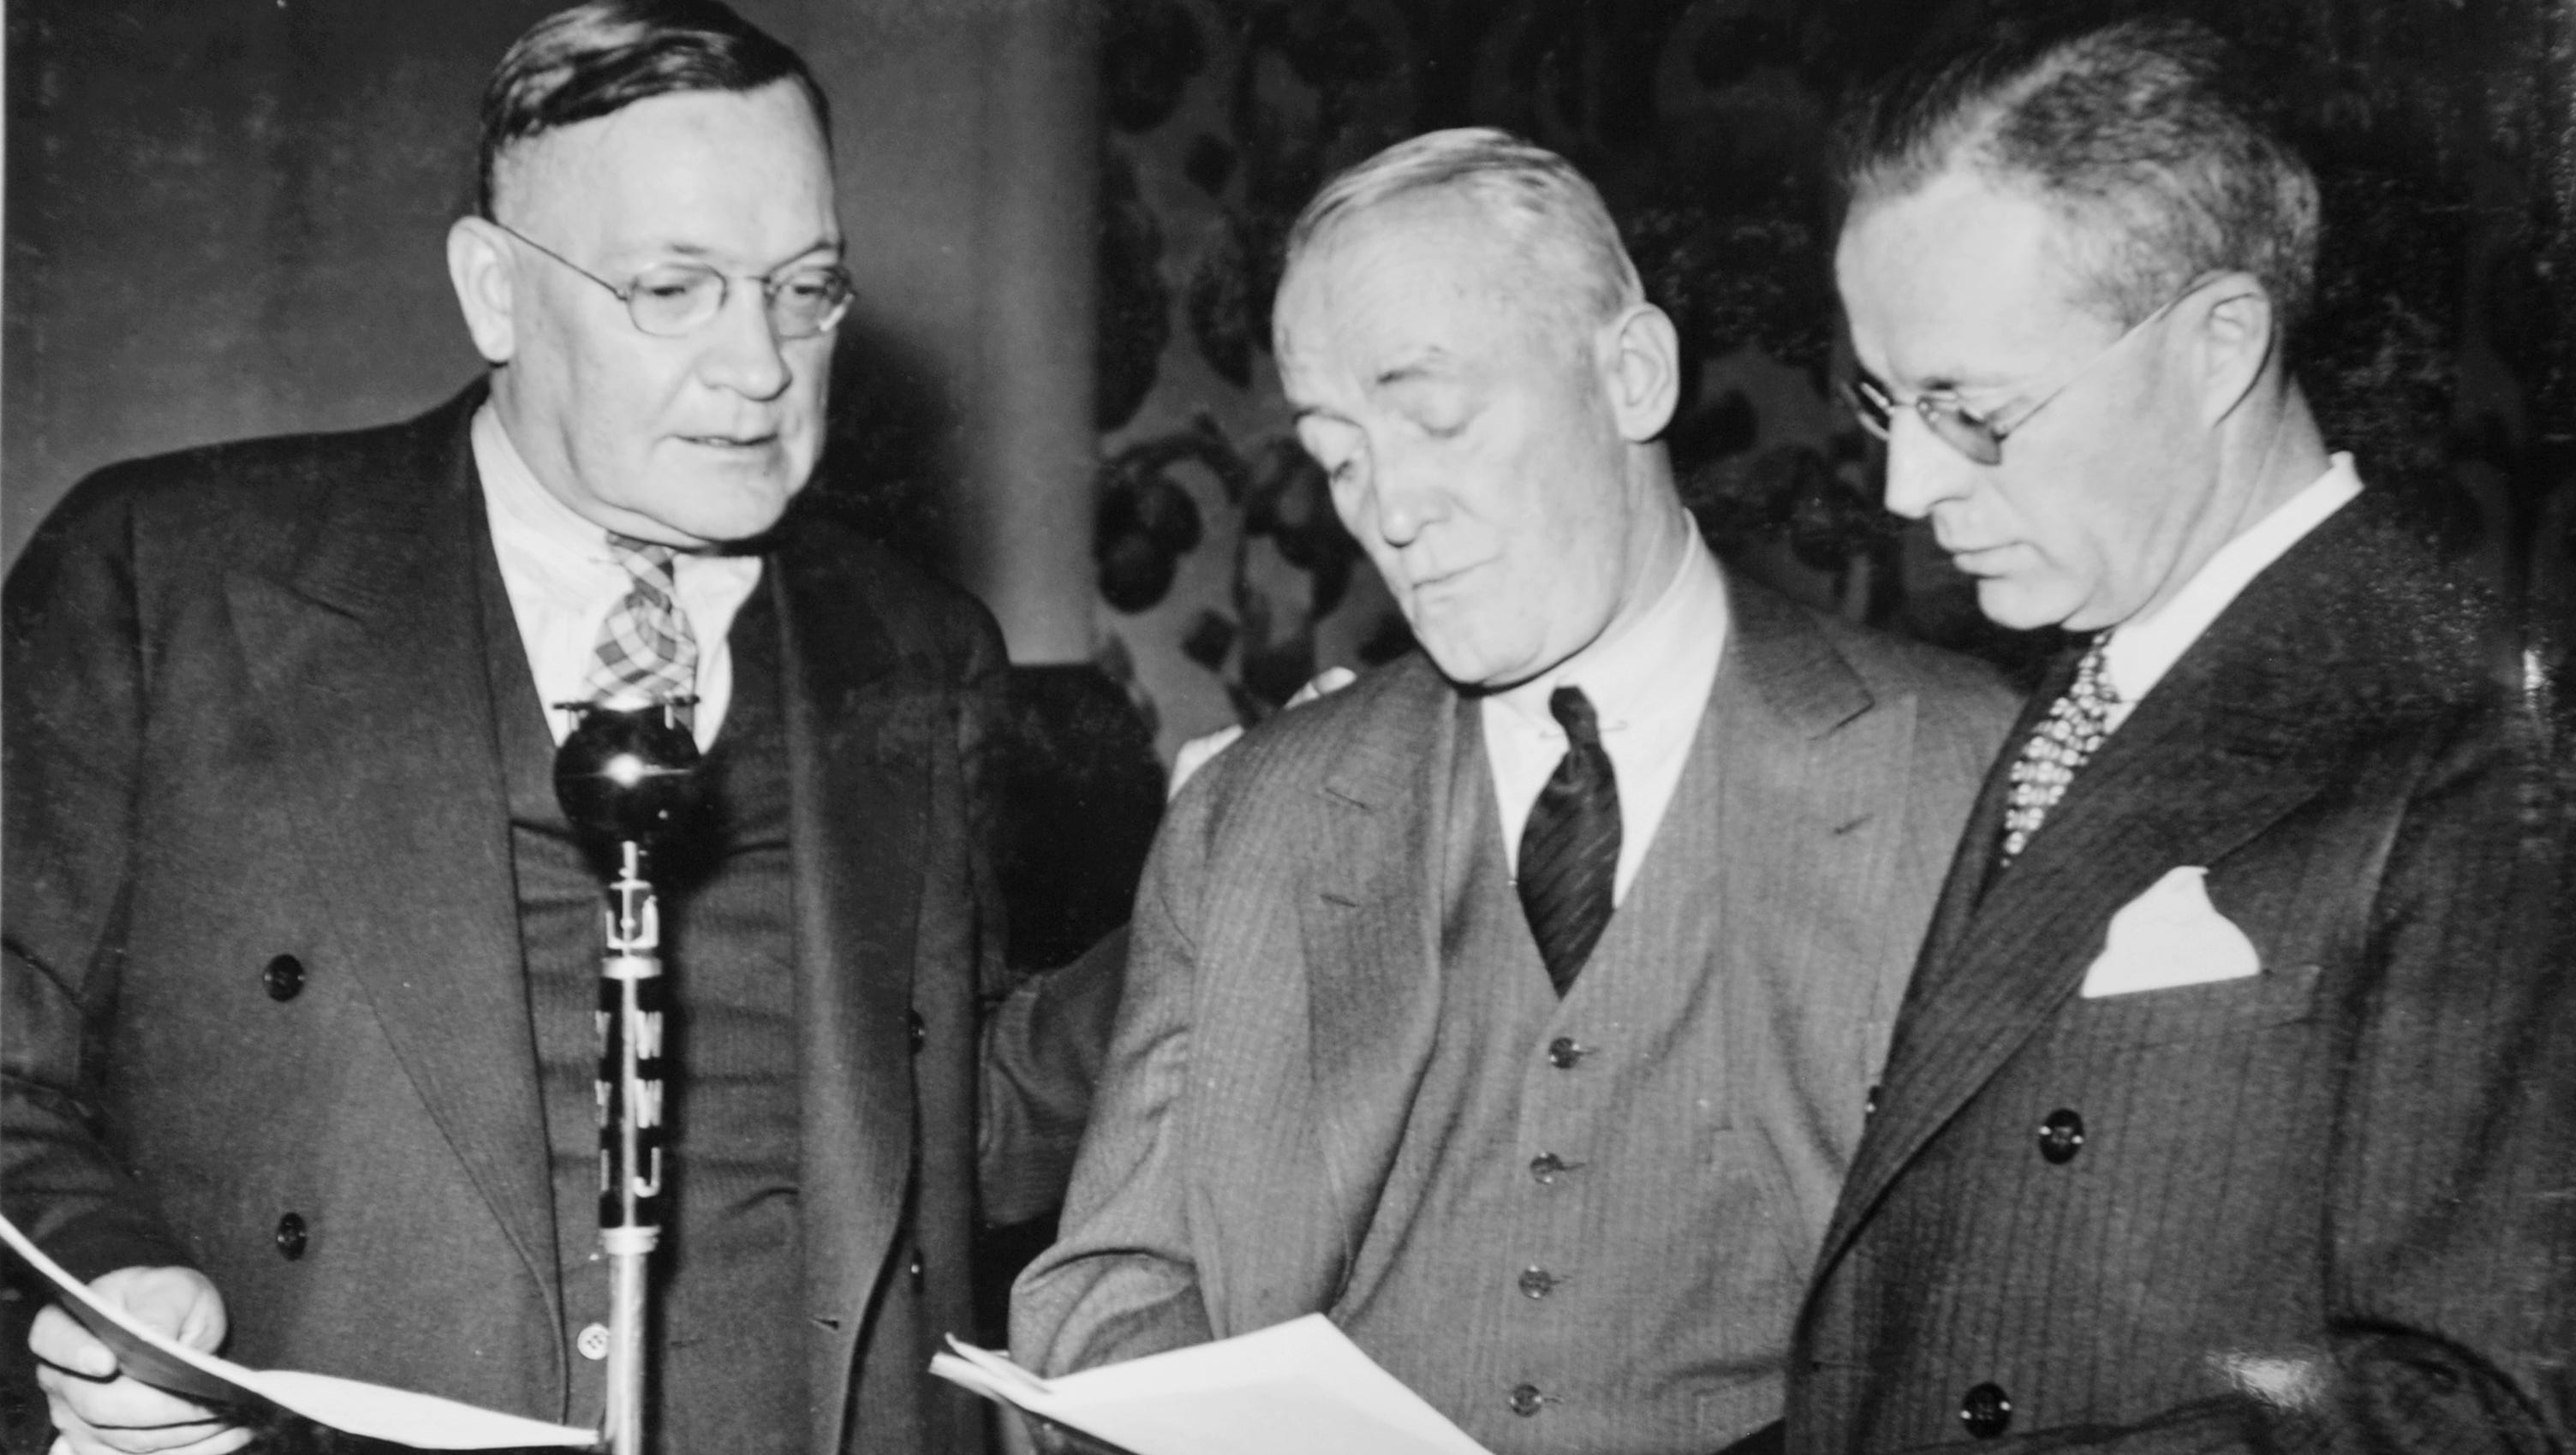 Detroit News columnist George Stark, left, broadcasts an interview with playwright/ composer/ performer George M. Cohan, center, in 1936.